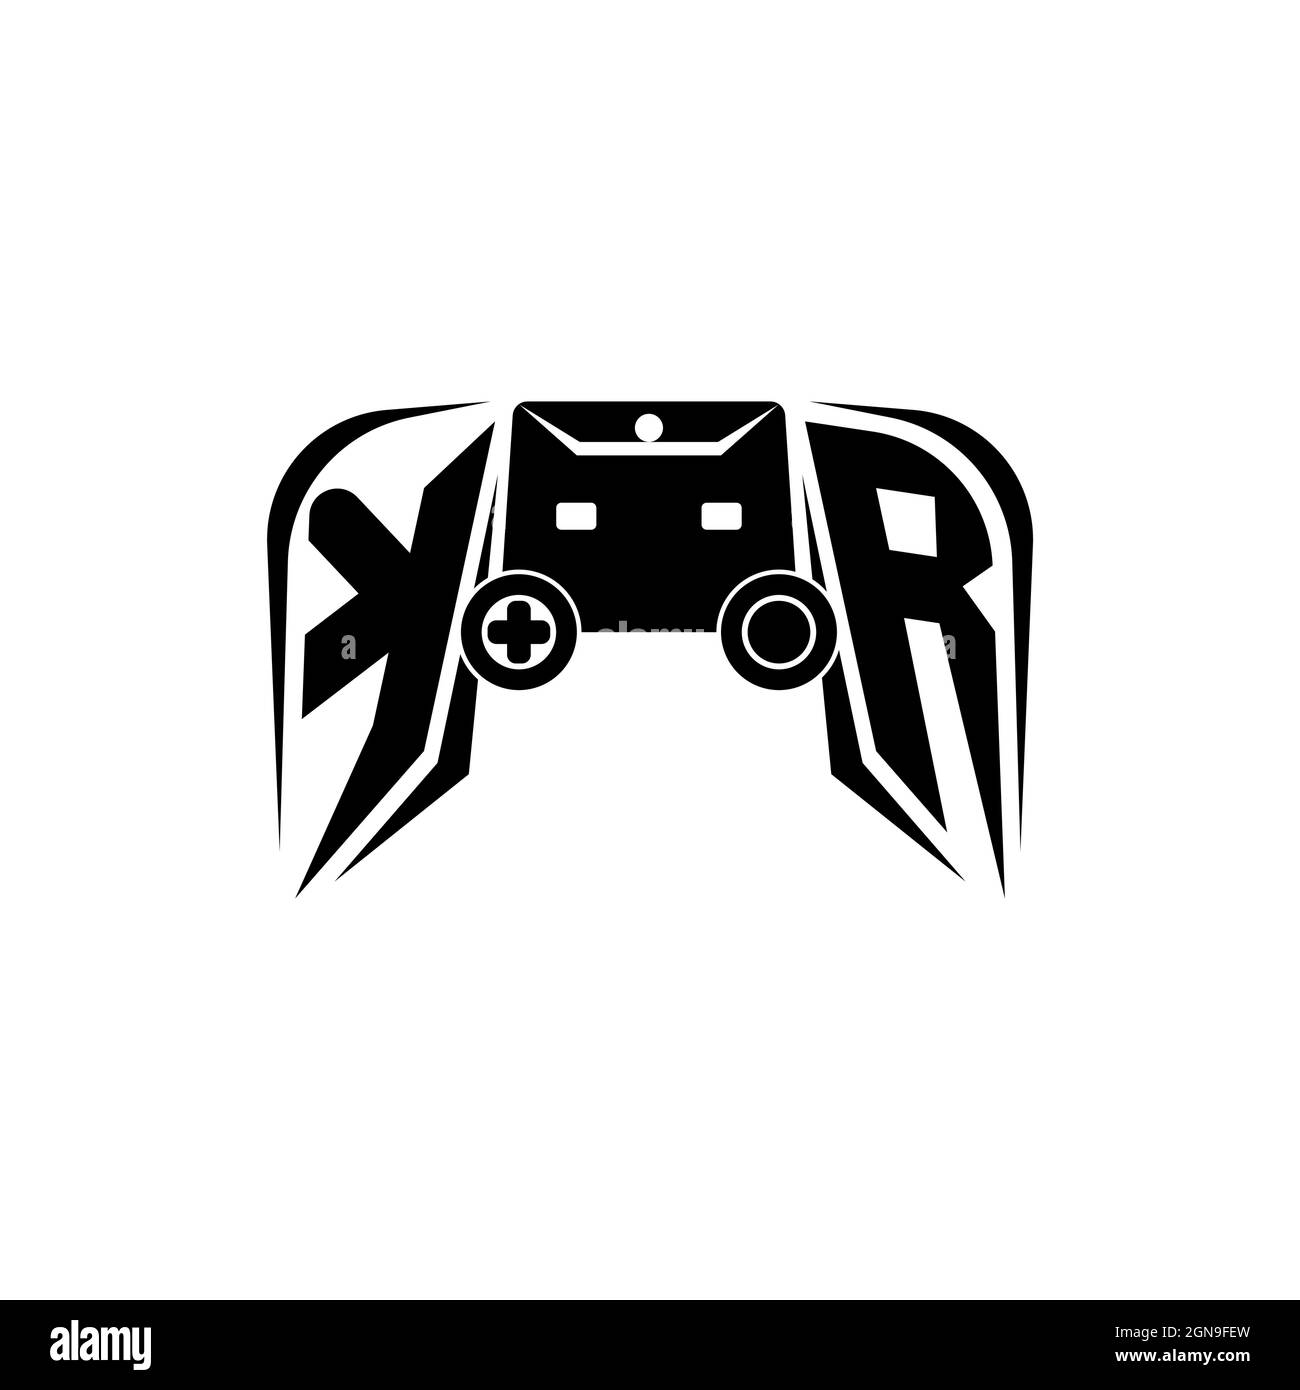 KR Initial ESport gaming logo. Game console shape style vector template Stock Vector